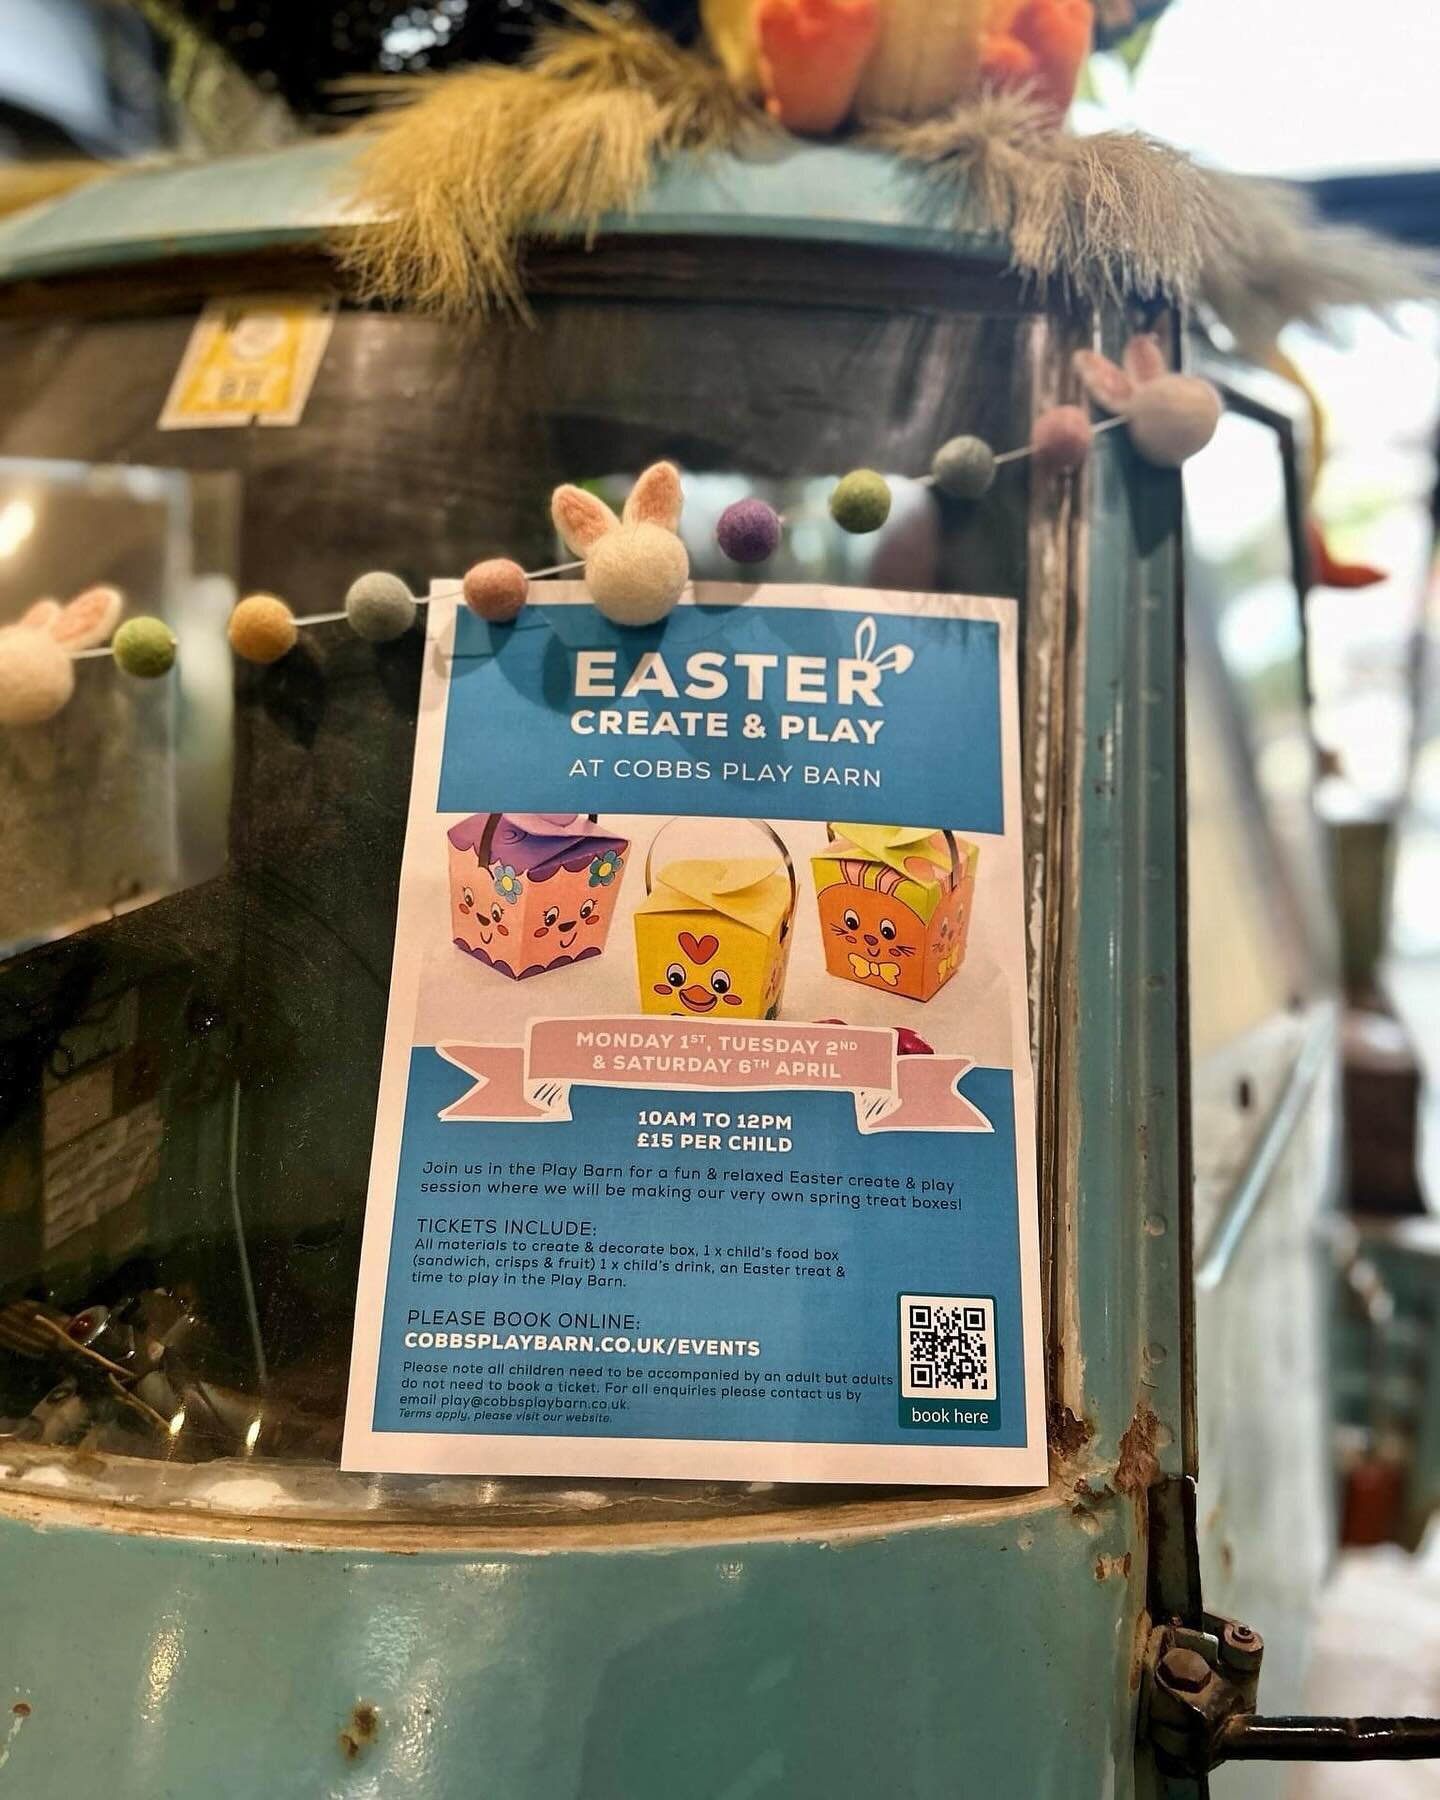 Come and join us at Cobbs Play Barn this Easter for a fun create-and-play session for your little ones🌿

We will be making our own spring treat boxes, which will involve lots of colouring! A yummy lunch box will be provided, and the chance to let of